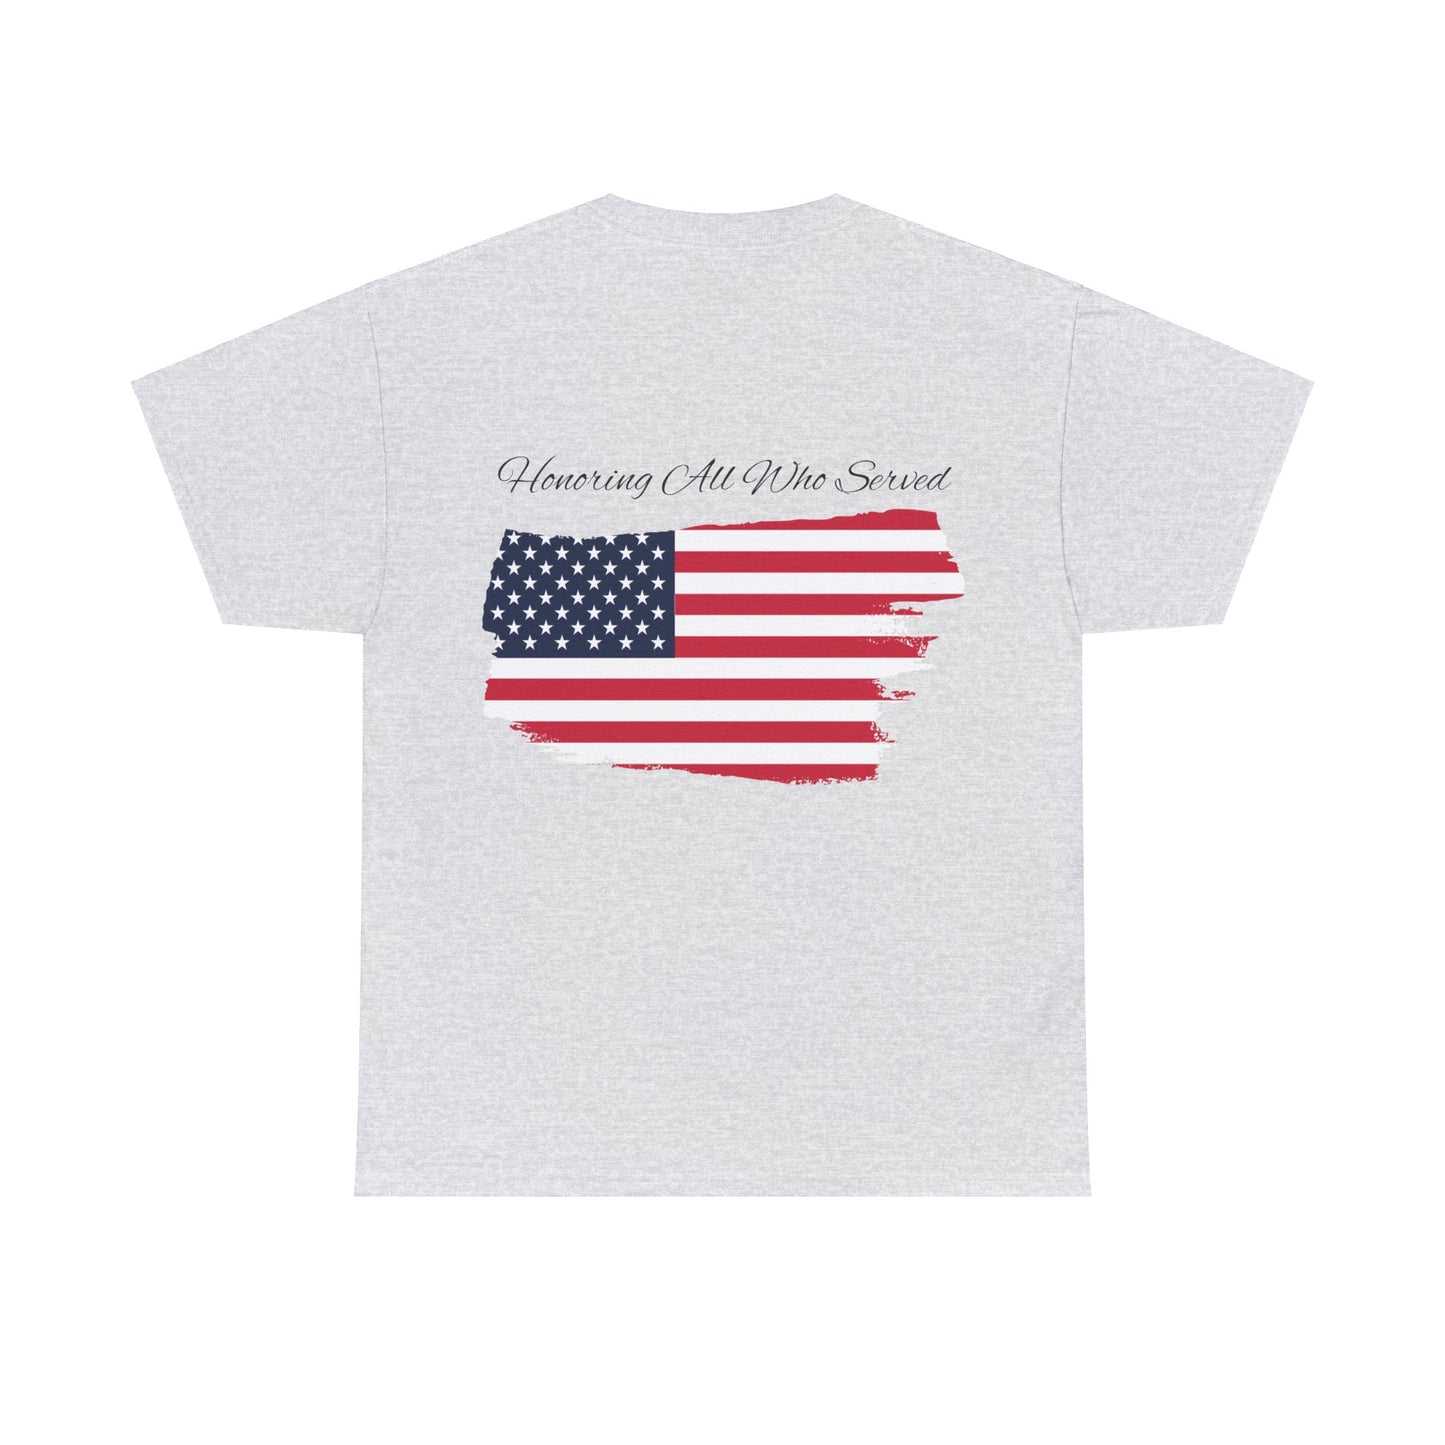 Unisex cotton tee with 'Honoring All Who Served' print for veterans tribute43